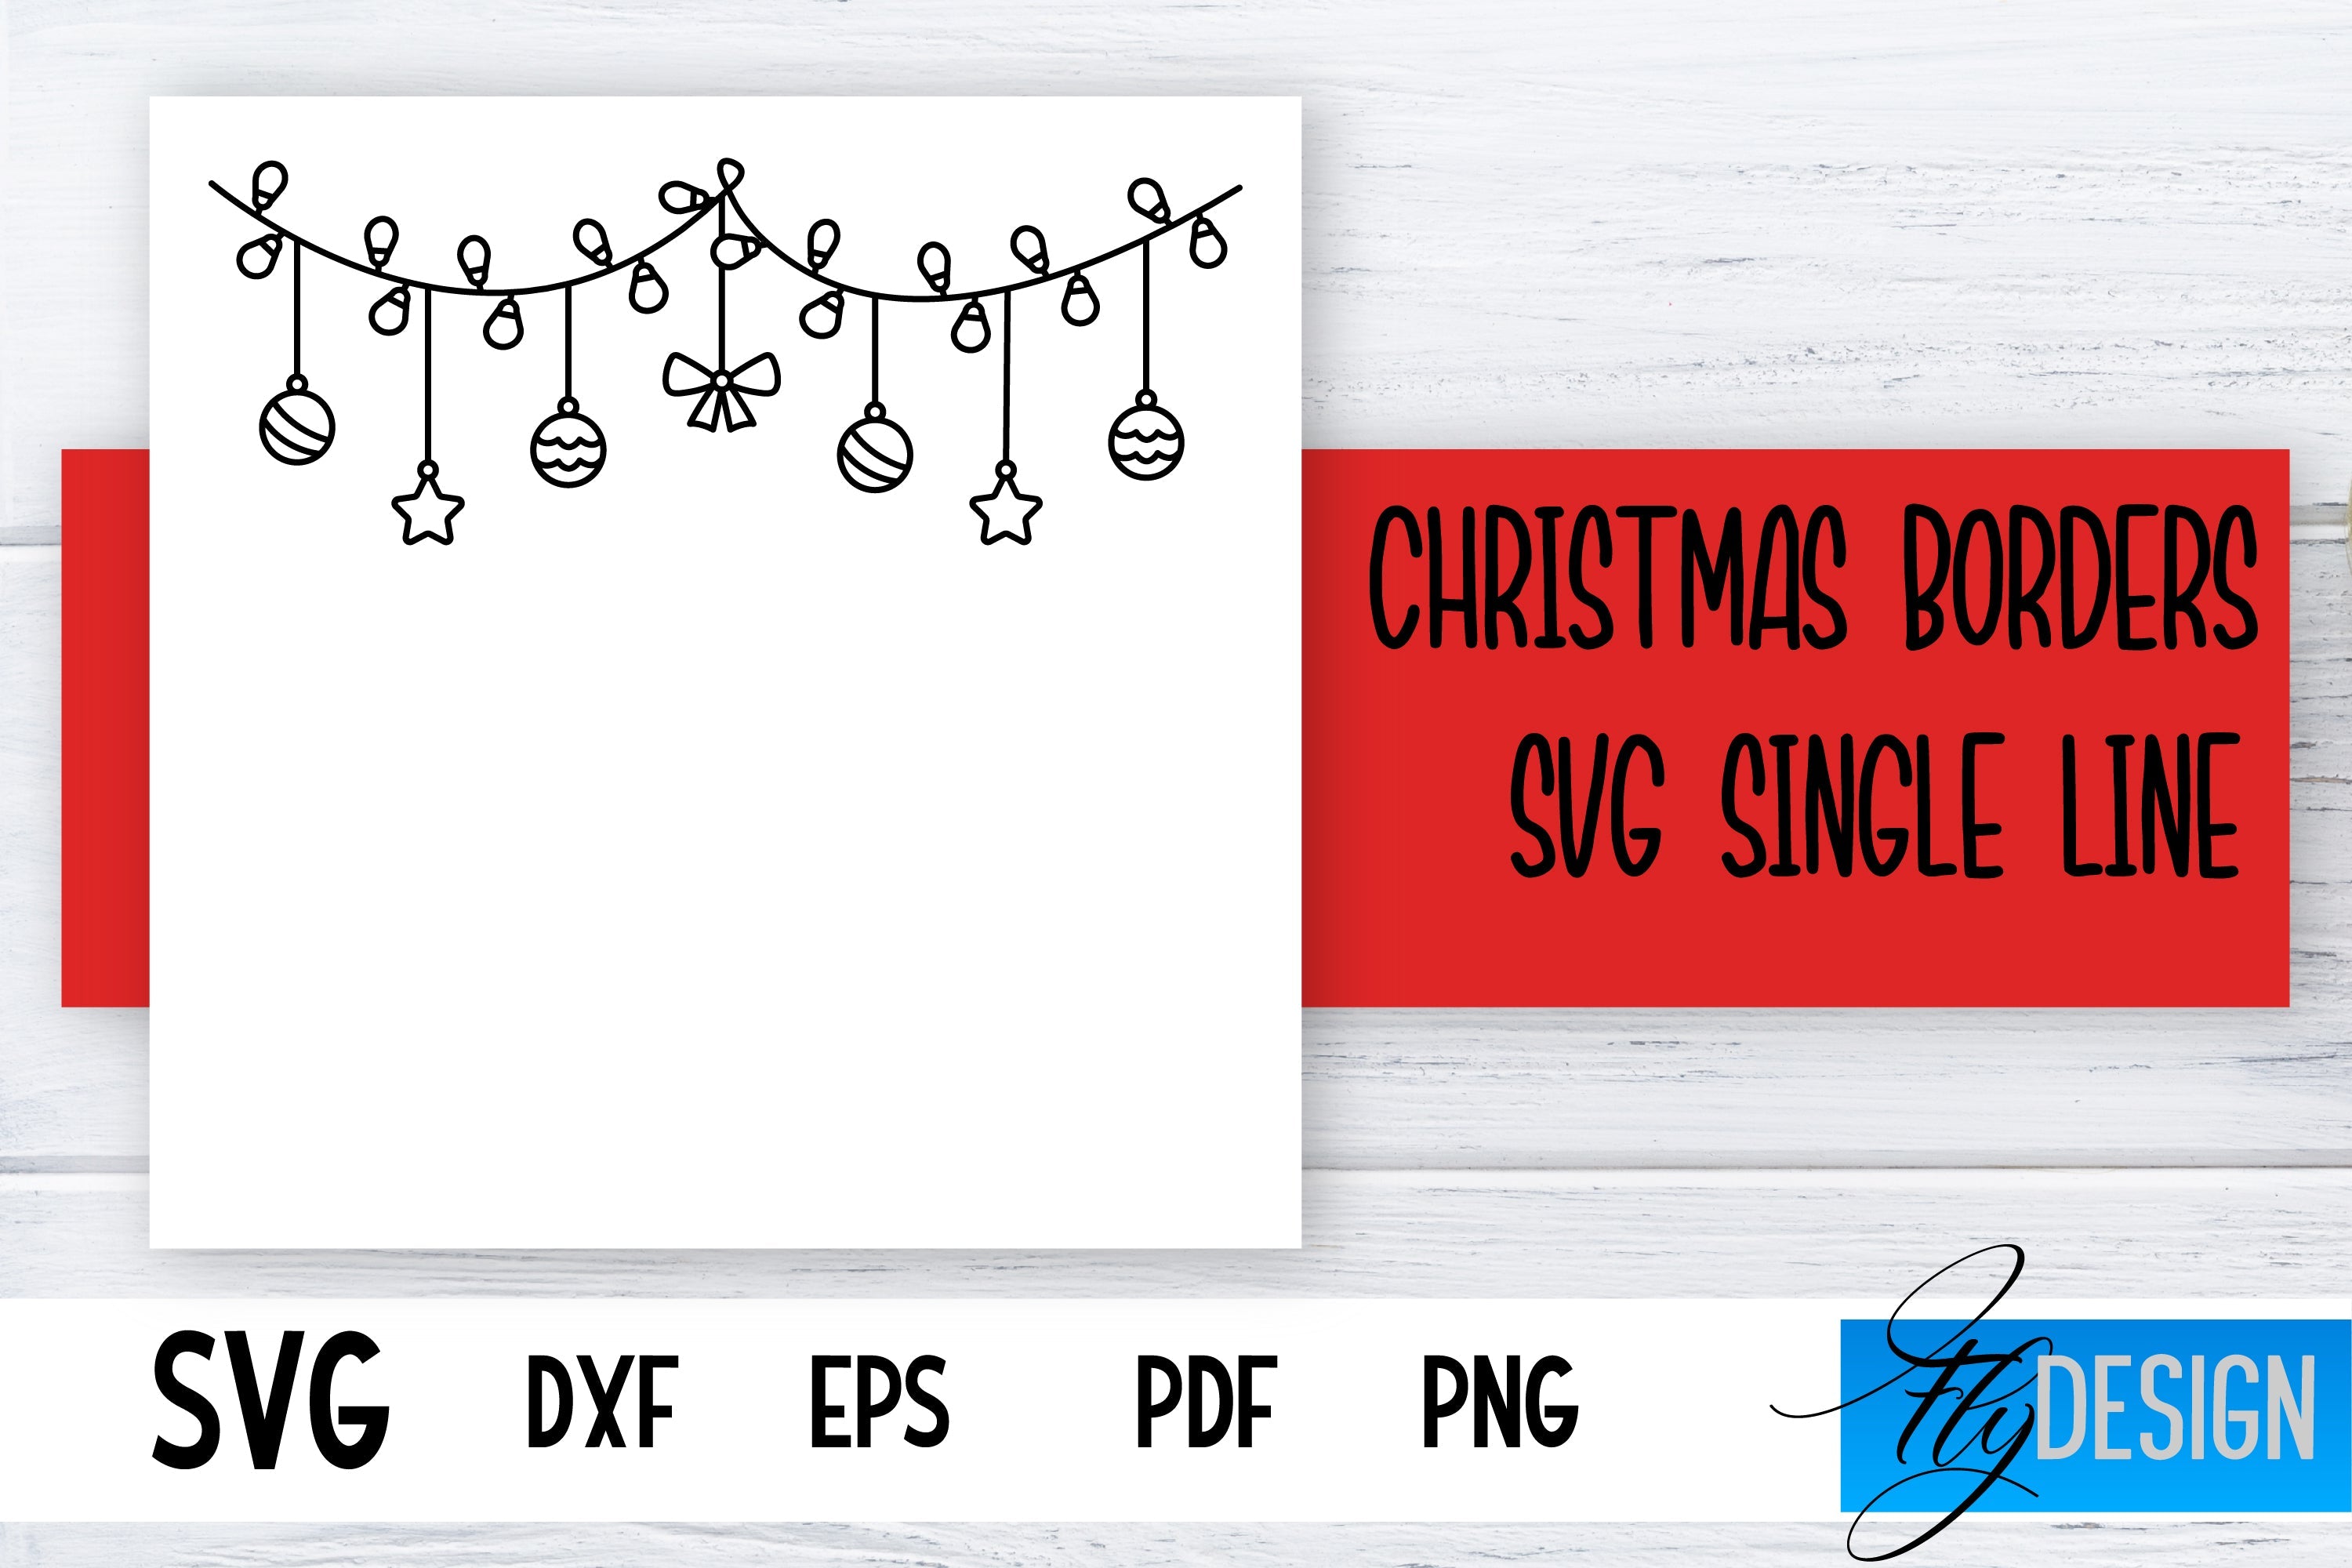 Christmas gift card holder template SVG, Foil quill